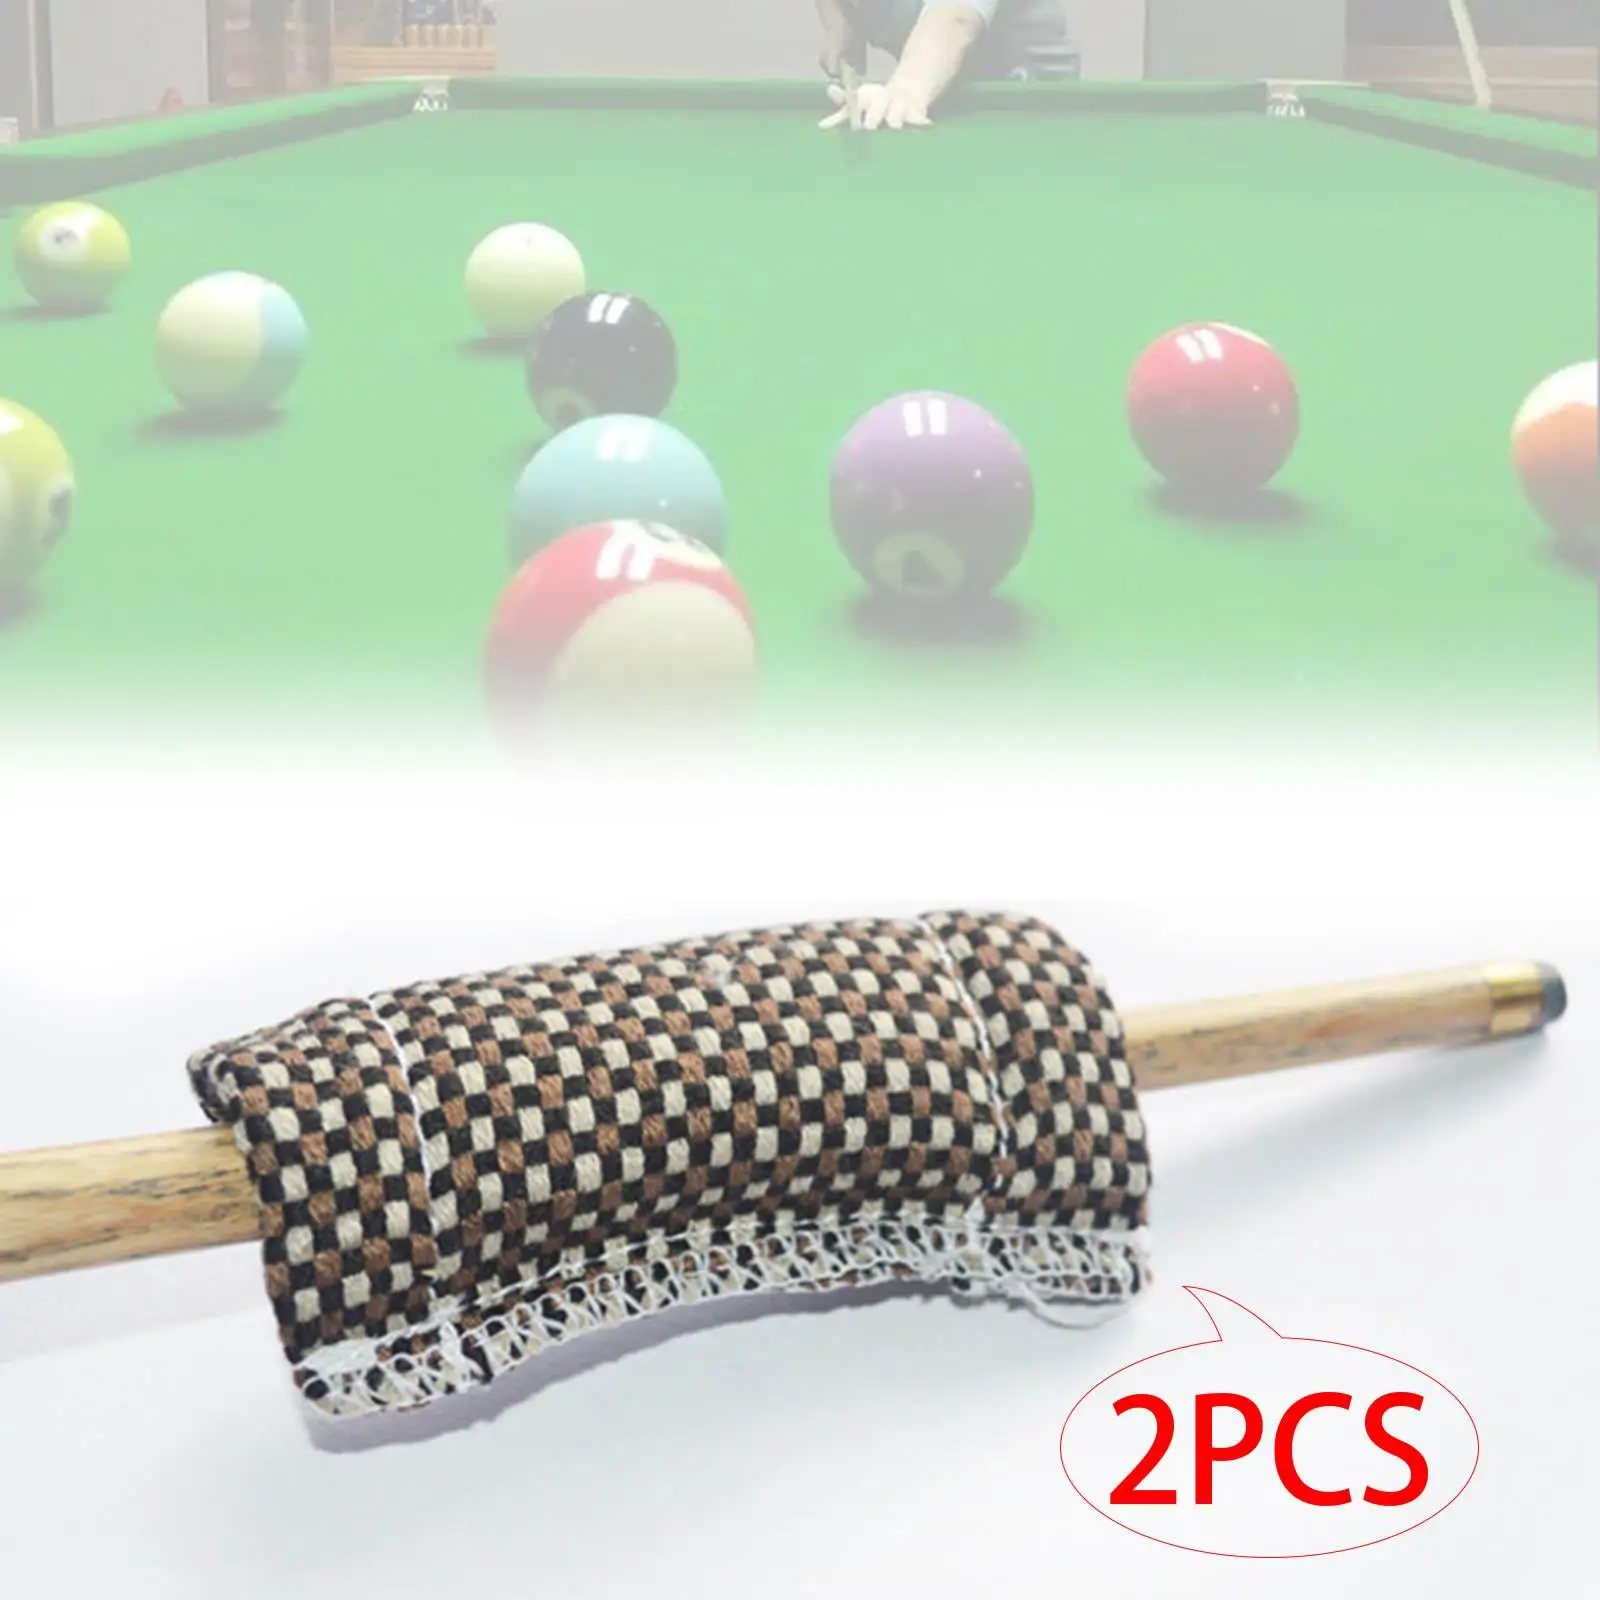 2x Billiards Snooker Pool Cue Cleaning Cloth Cue Shaft Polisher Burnisher